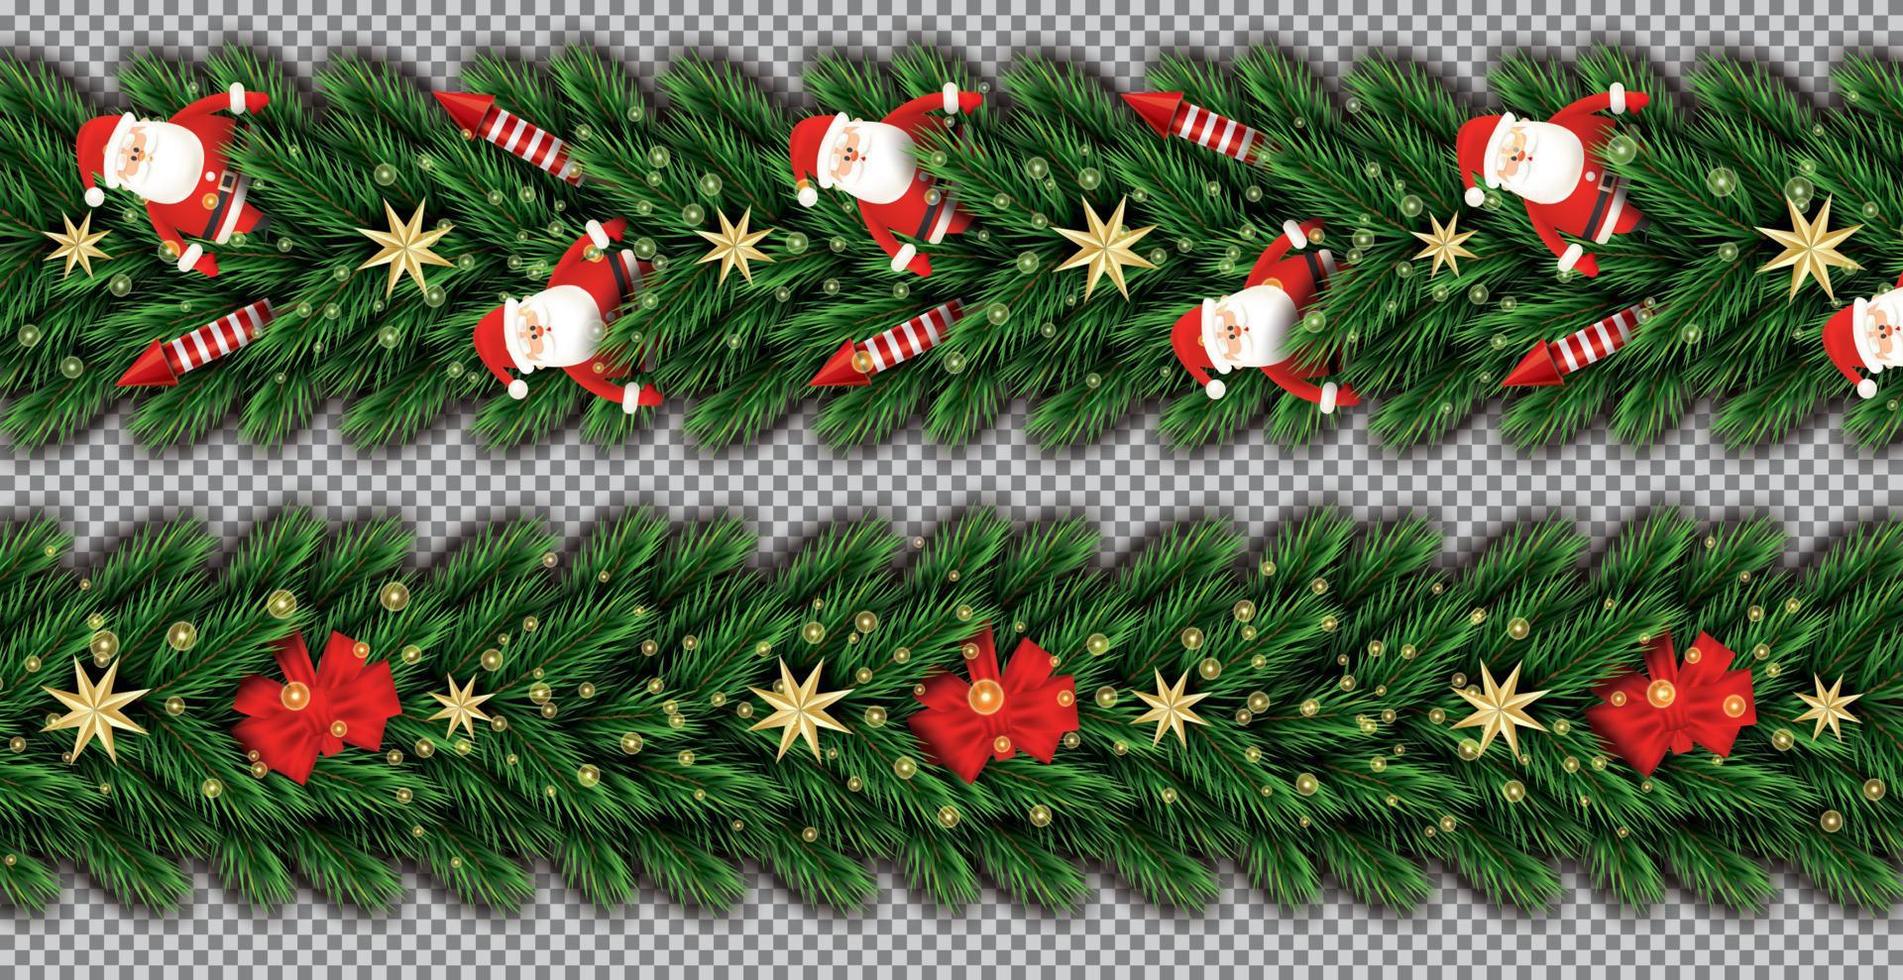 Border Set with Santa Claus, Christmas Tree Branches, Golden Stars, Red Rockets and Red Bow on Transparent Background. vector